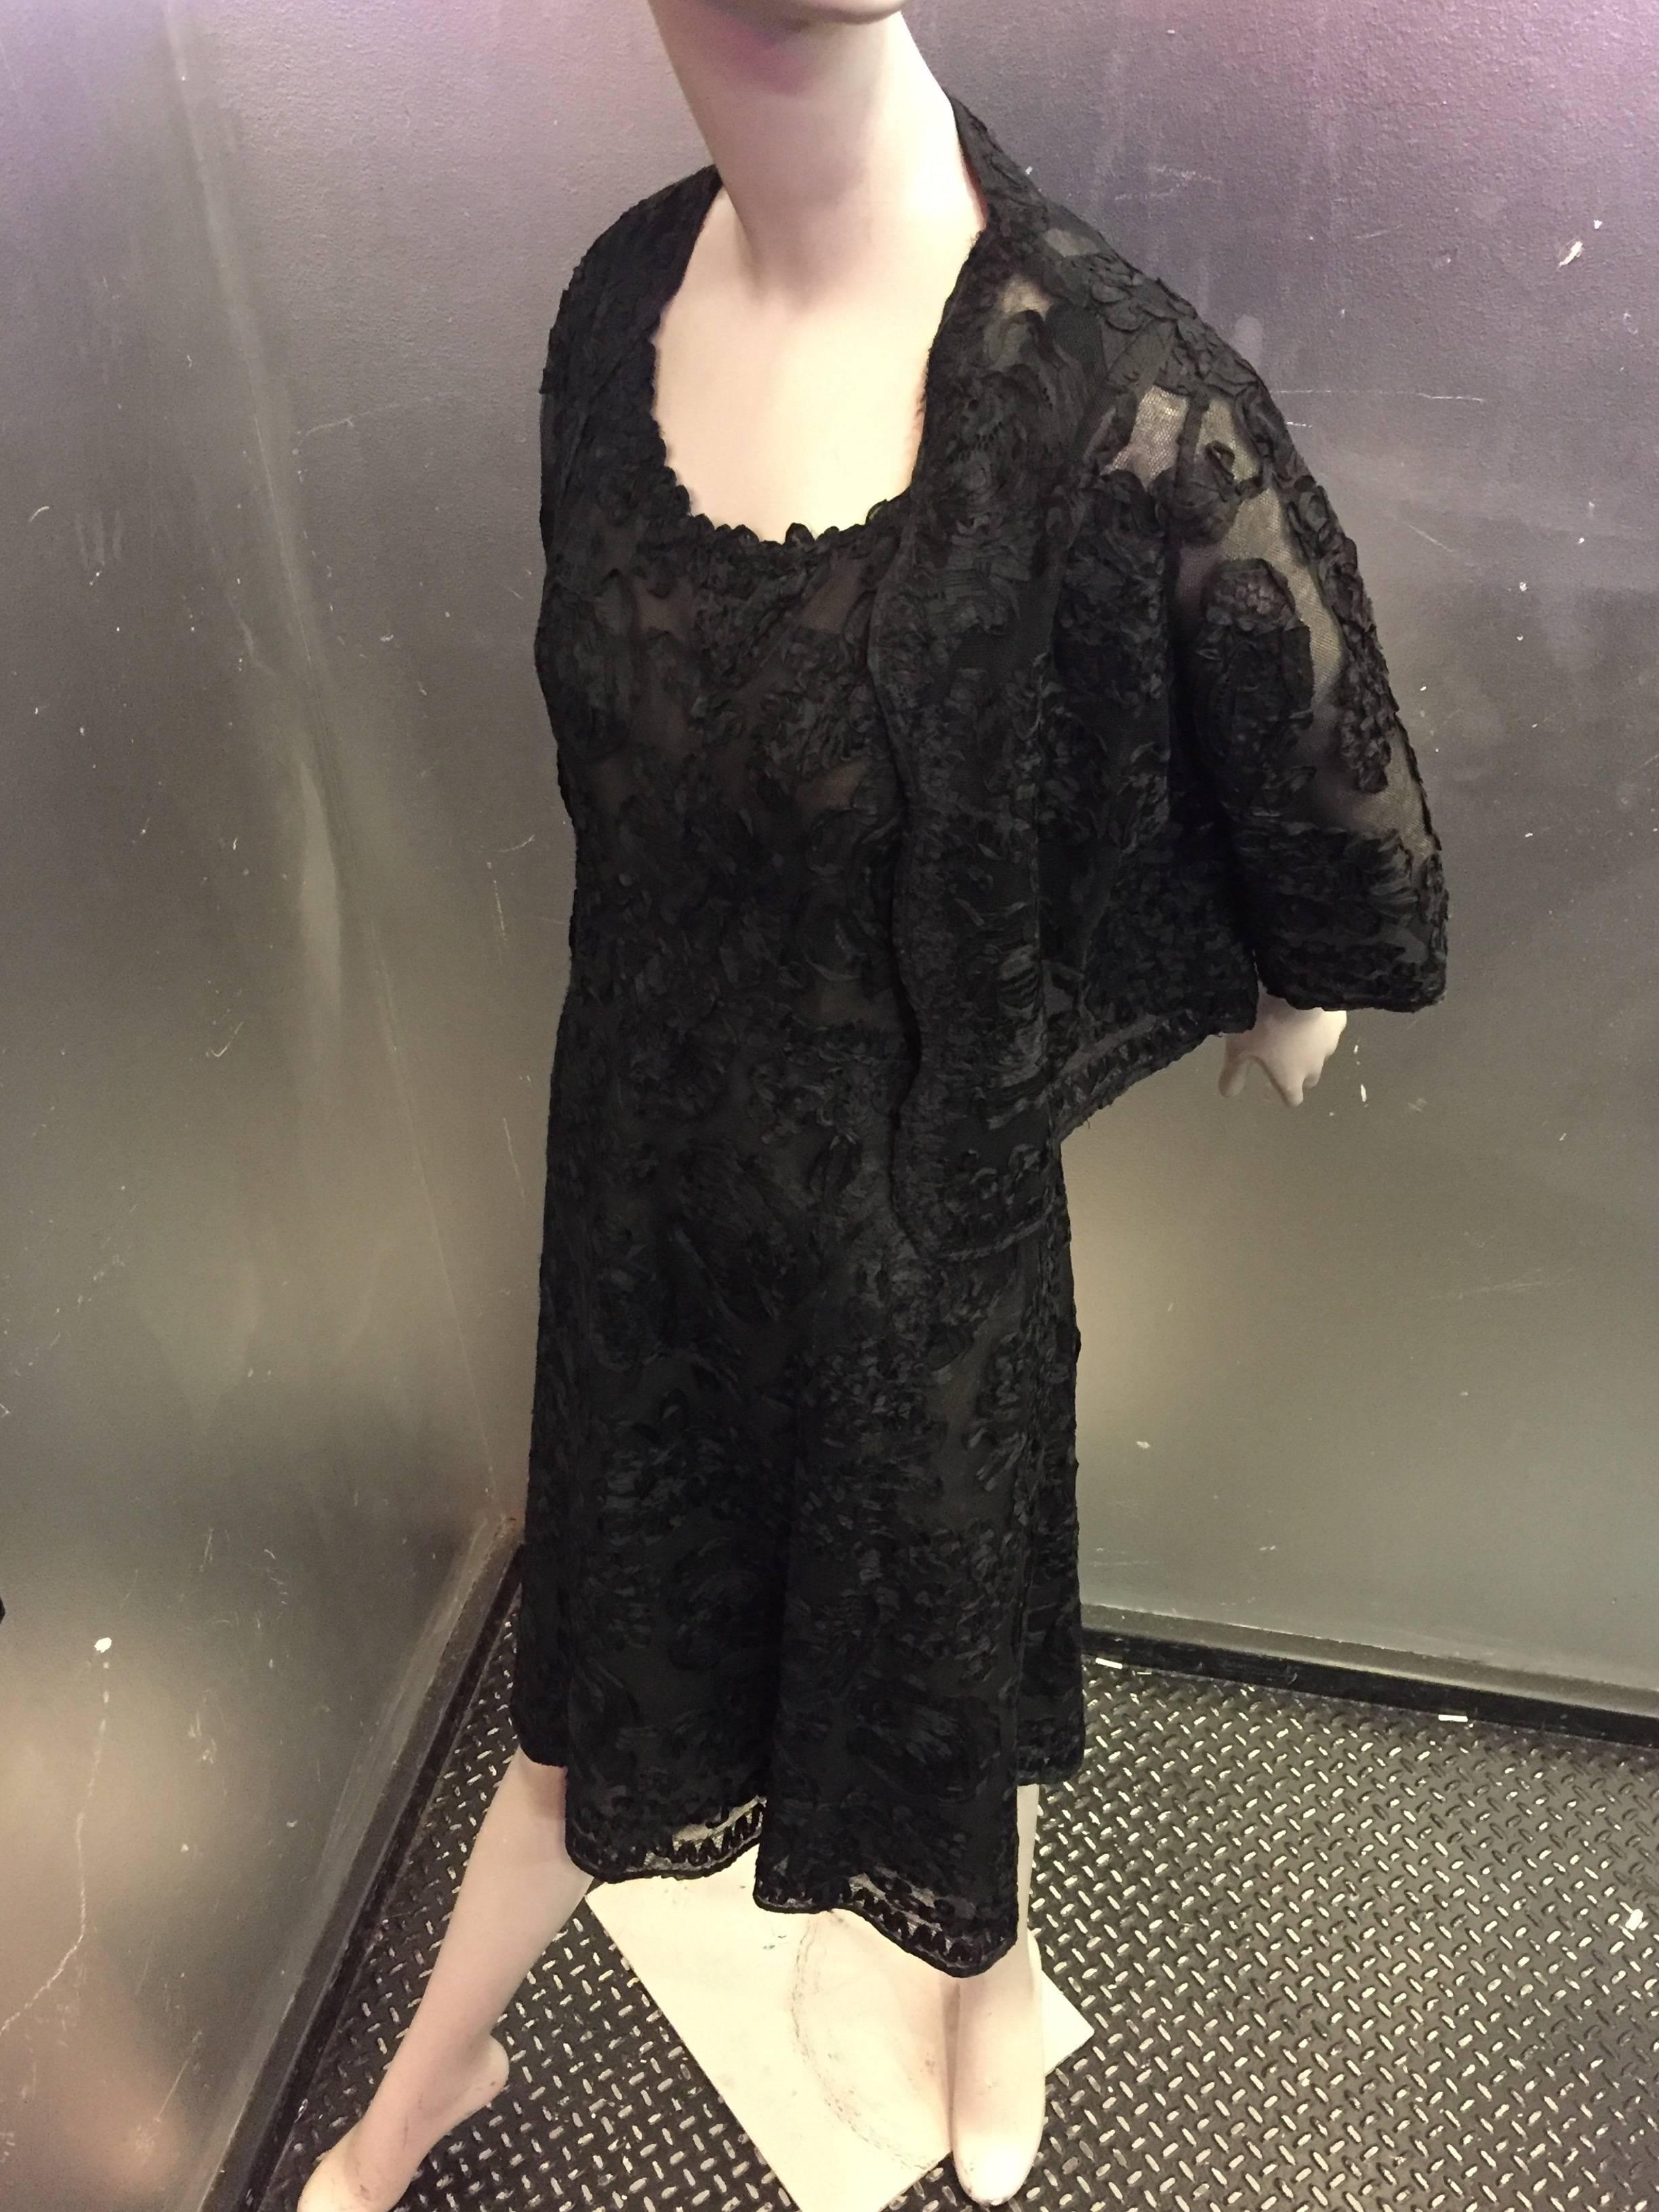 A sensationally classic Christian Dior numbered Couture ensemble in black net with sculpted ribbon lace and layered silk chiffon base. 

This luxurious and delicate ensemble consists of a dress and jacket, both of a quintessential Dior silhouette.